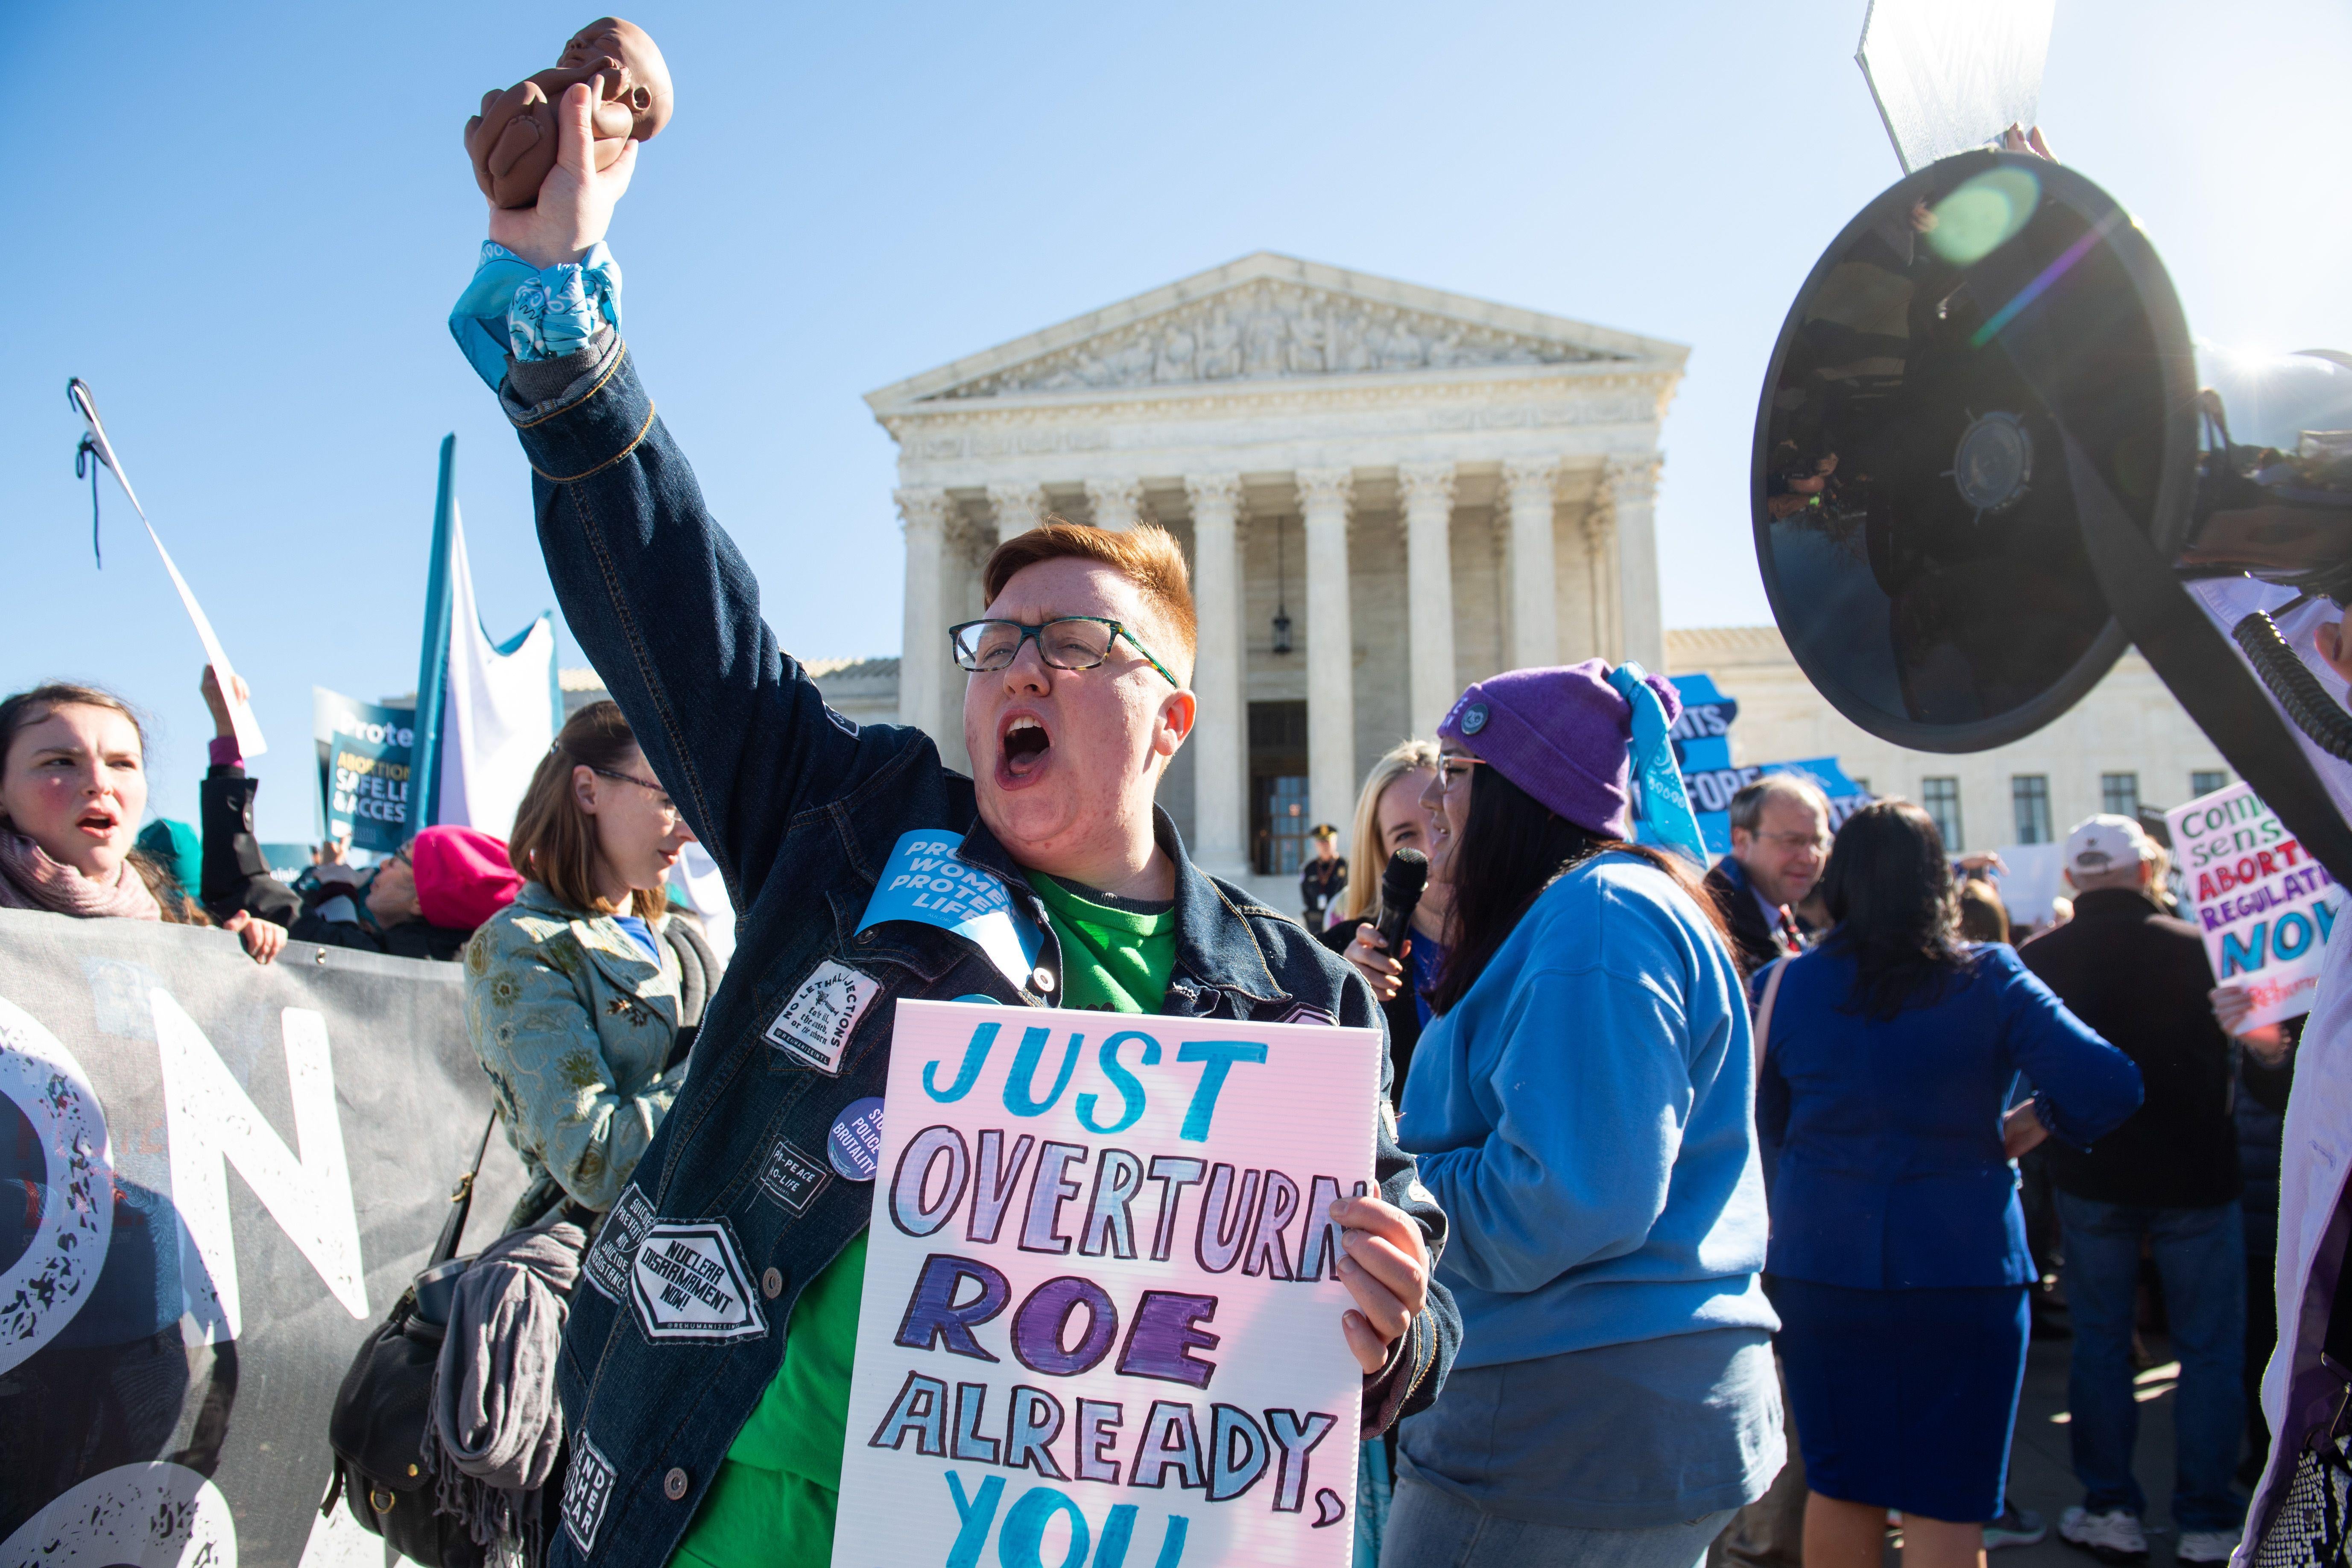 A protester holding a sign urging the Supreme Court to overturn Roe v. Wade.